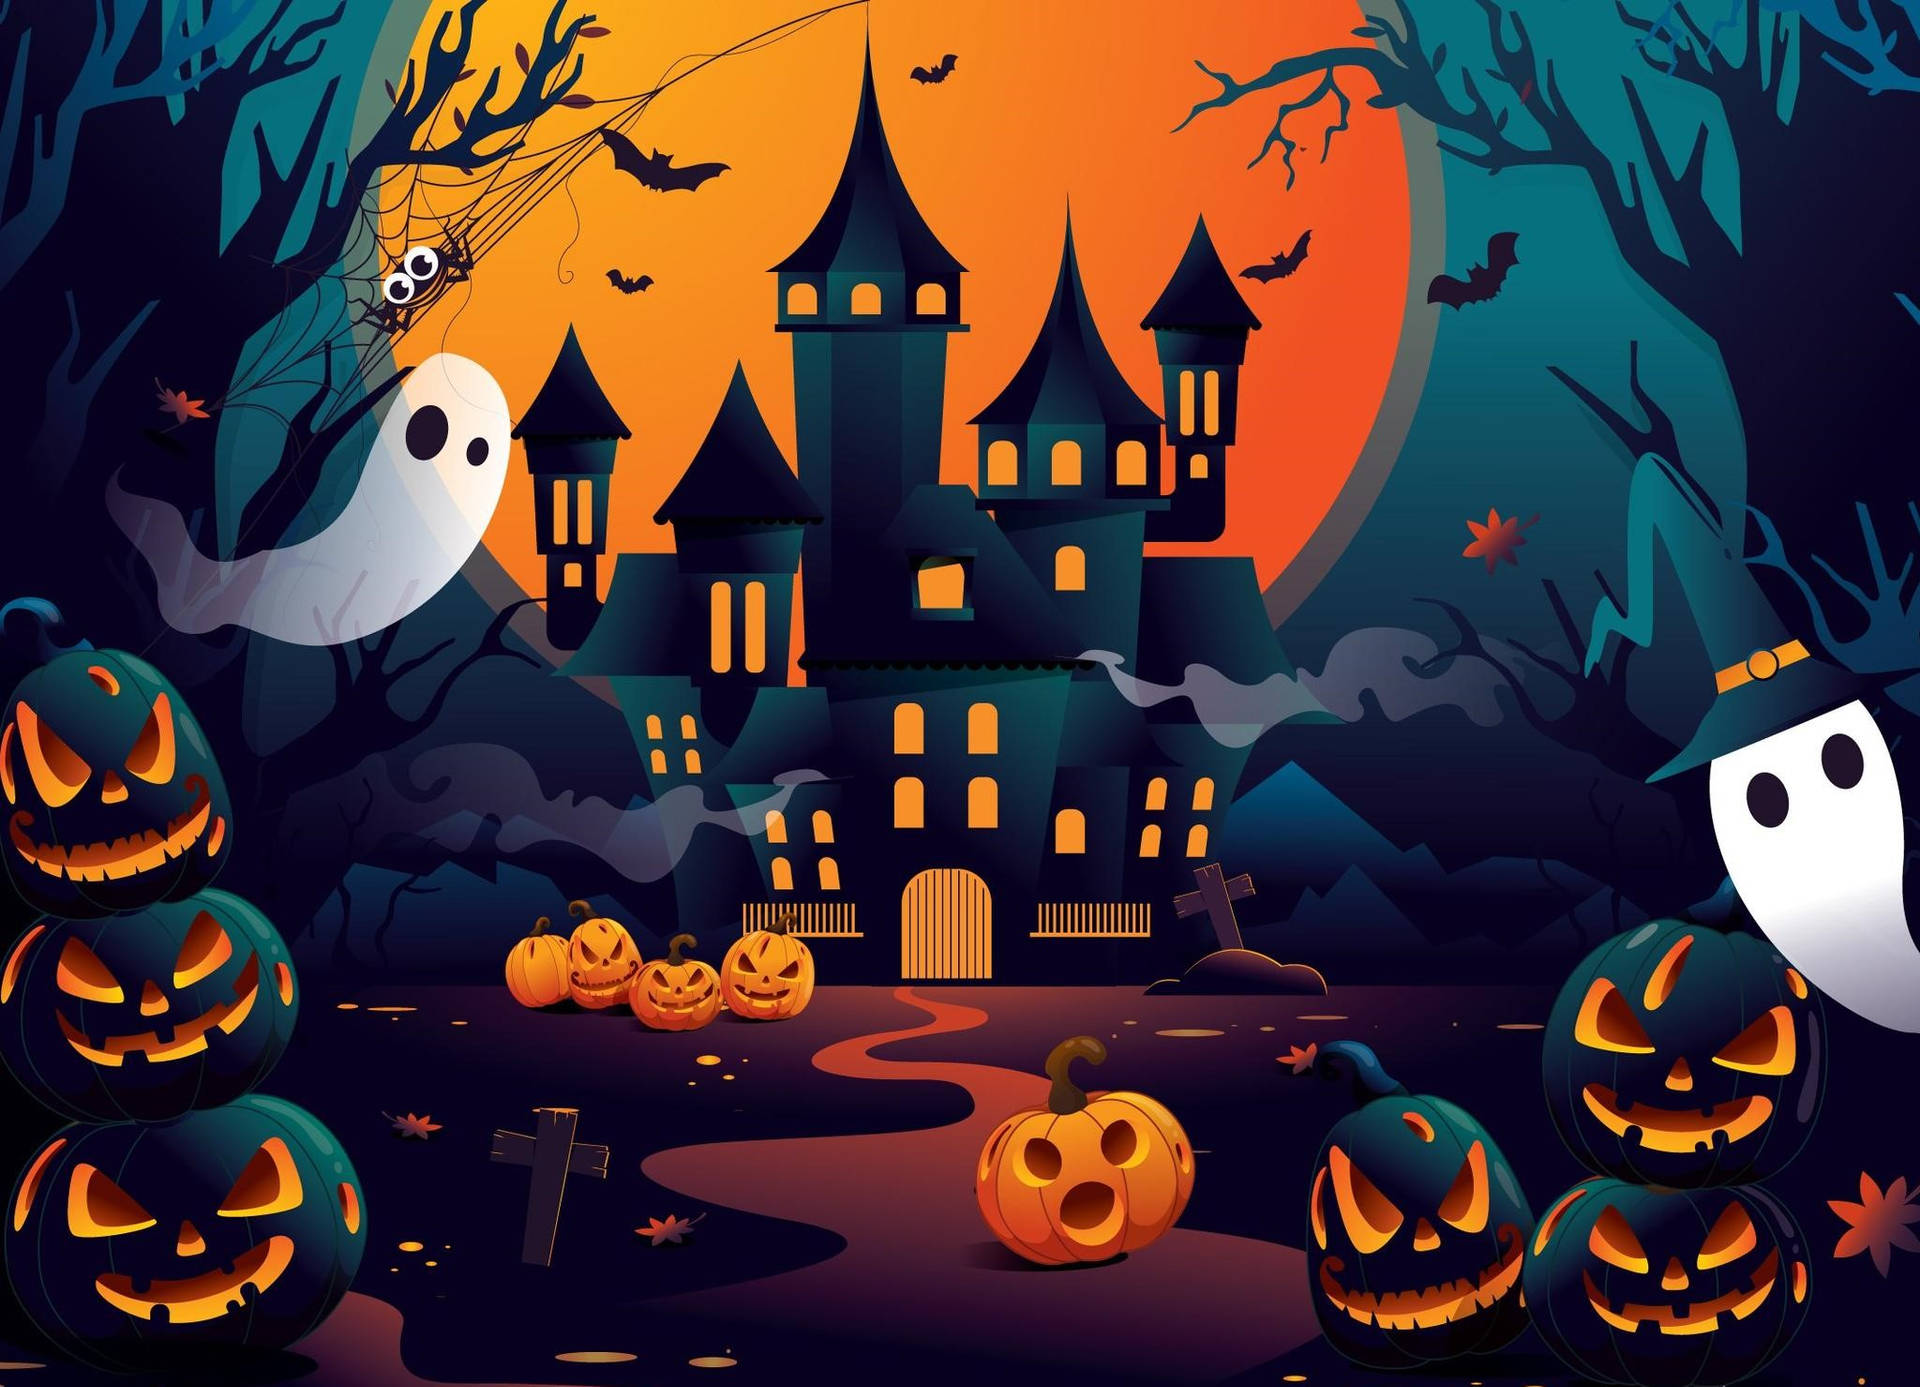 Get Ready For A Frightfully Fun-filled Halloween